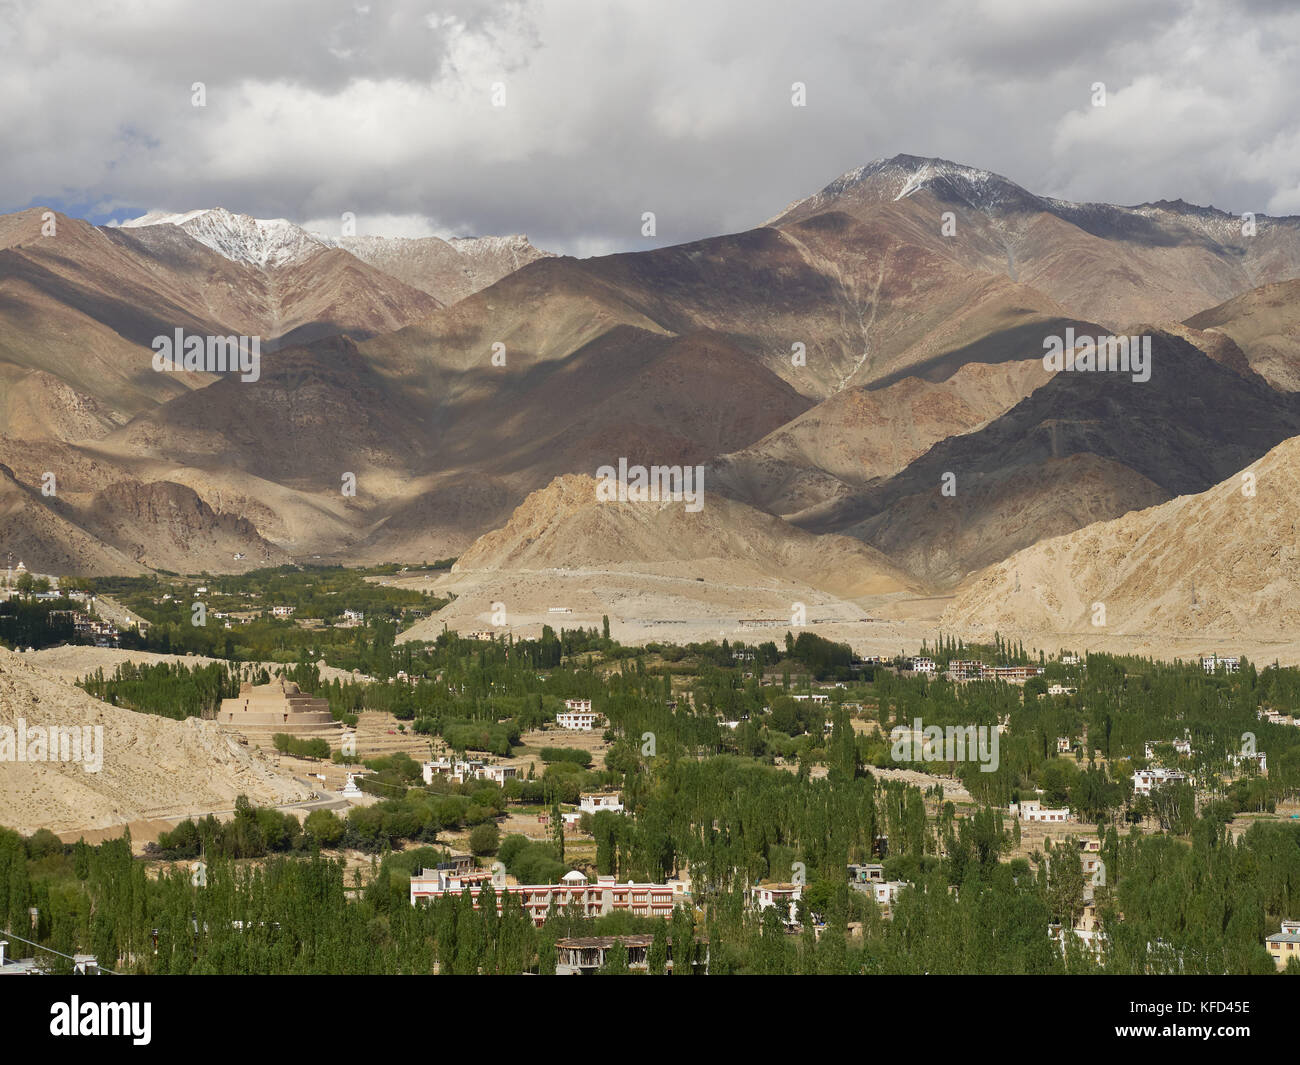 Huge mountain valley: brown mountains, shadows on the slopes, below in the wide part of the valley are many green trees and white houses, summer in th Stock Photo